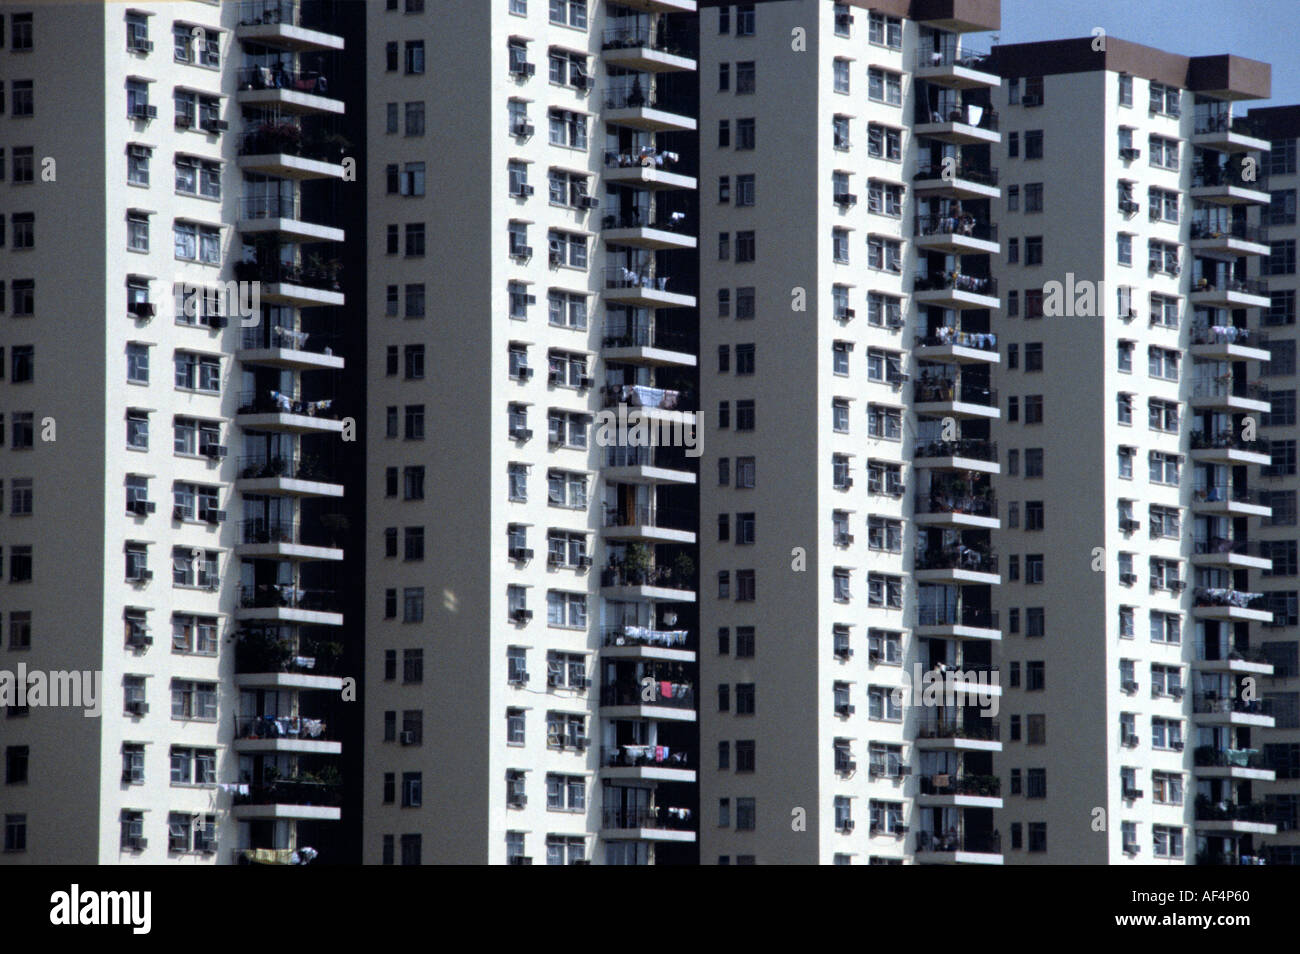 Row upon row of uniform intensive housing in an area of the waterfront in the late 1970s Hong Kong Stock Photo